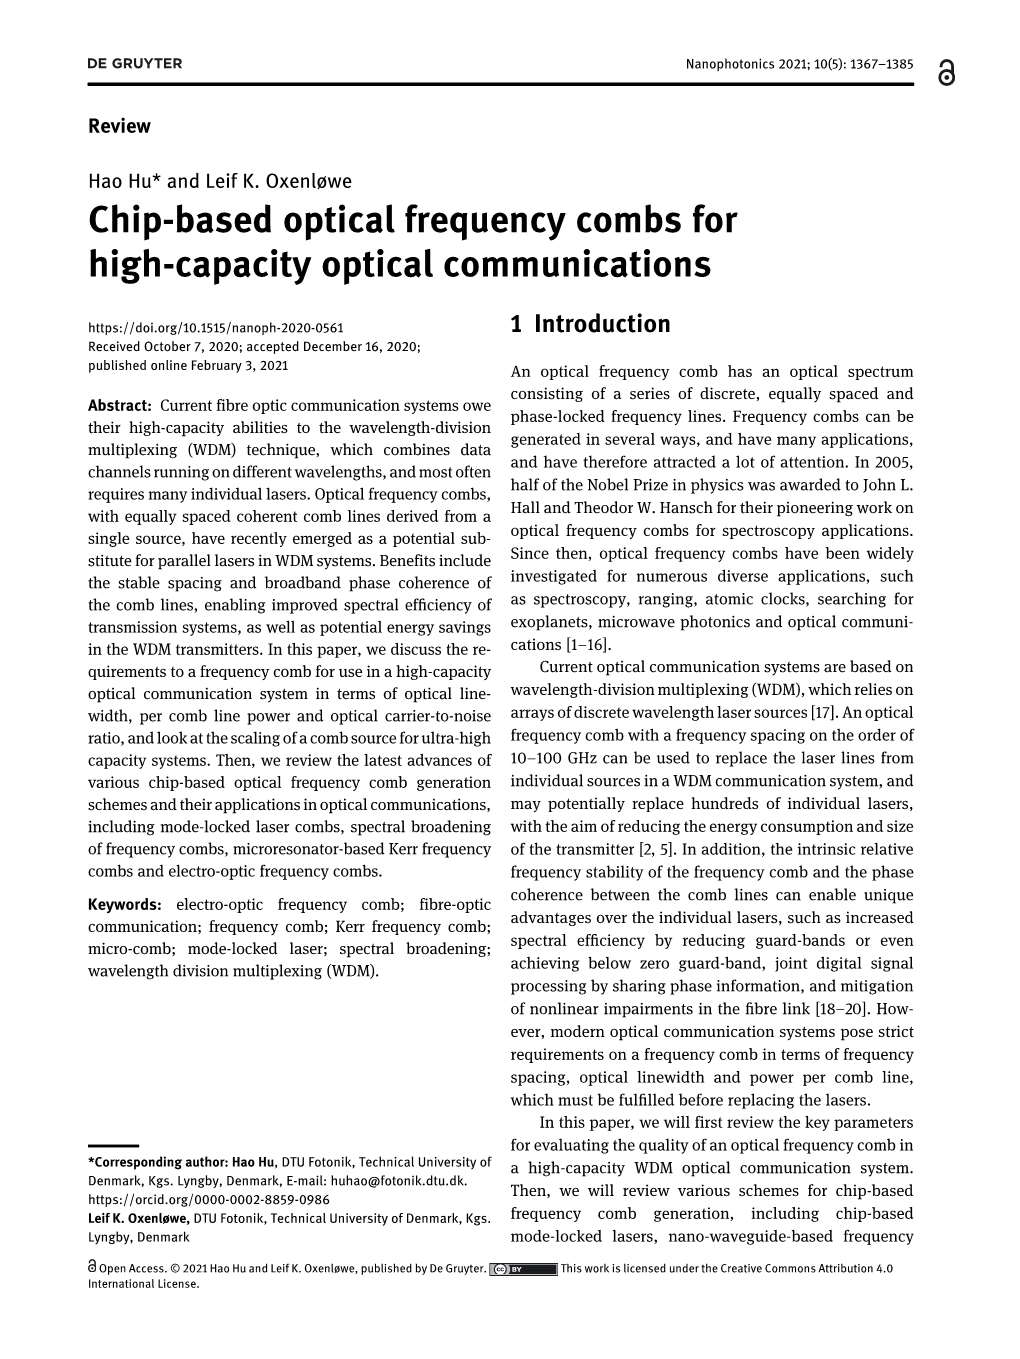 Chip-Based Optical Frequency Combs for High-Capacity Optical